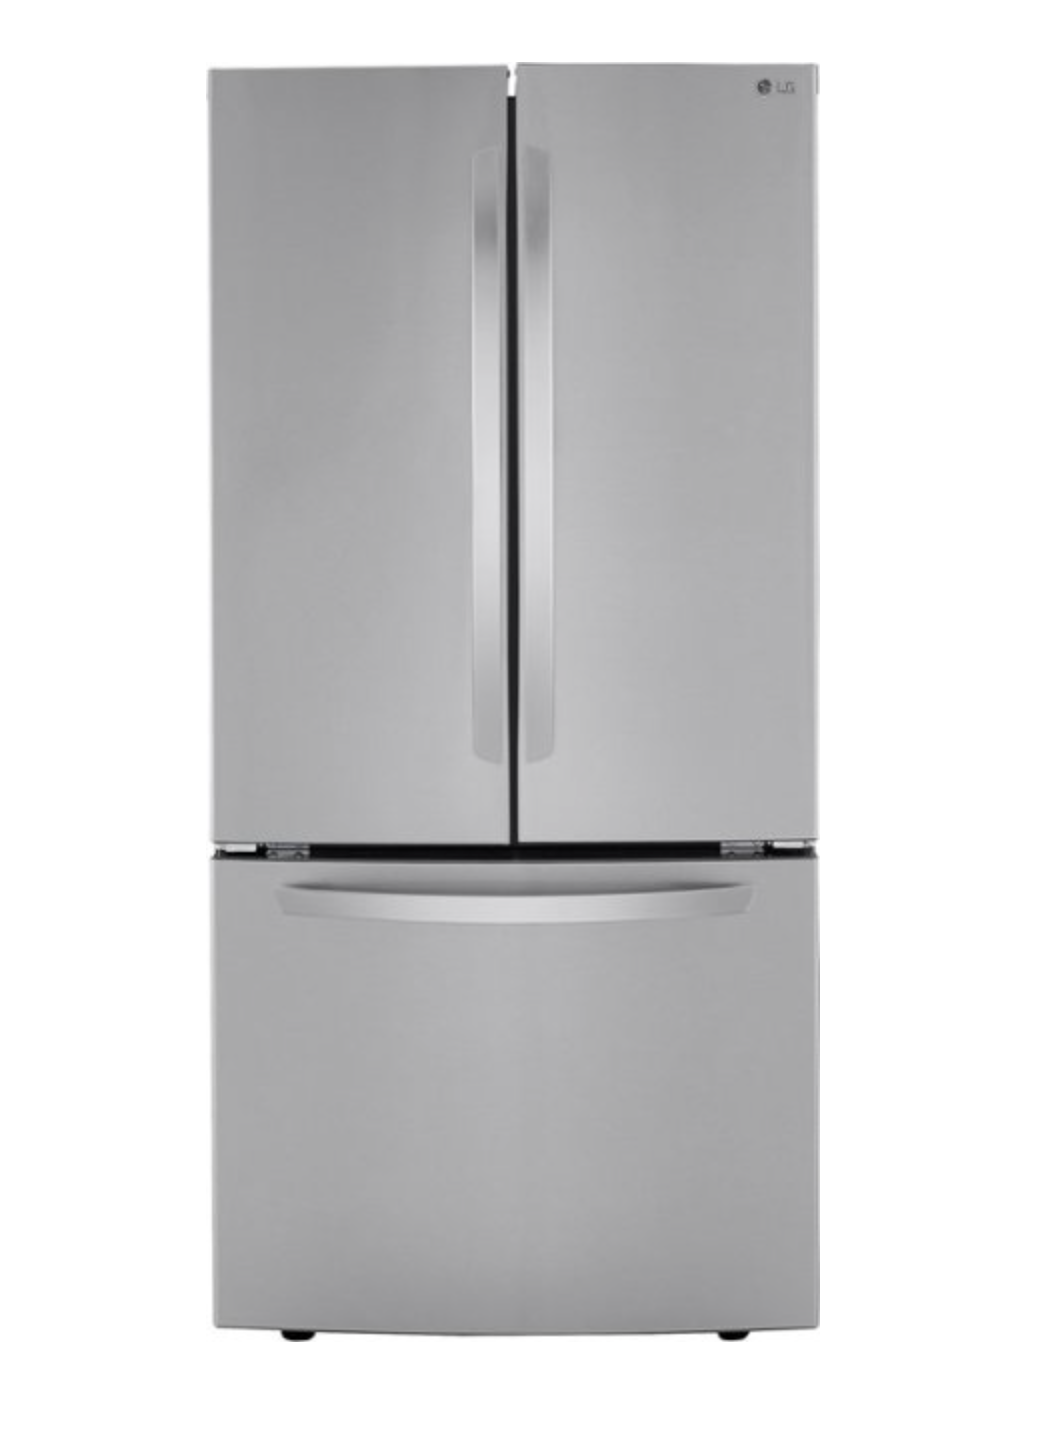 LG - 25.1 Cu. Ft. French Door Refrigerator with Ice Maker - Stainless Steel – (P)